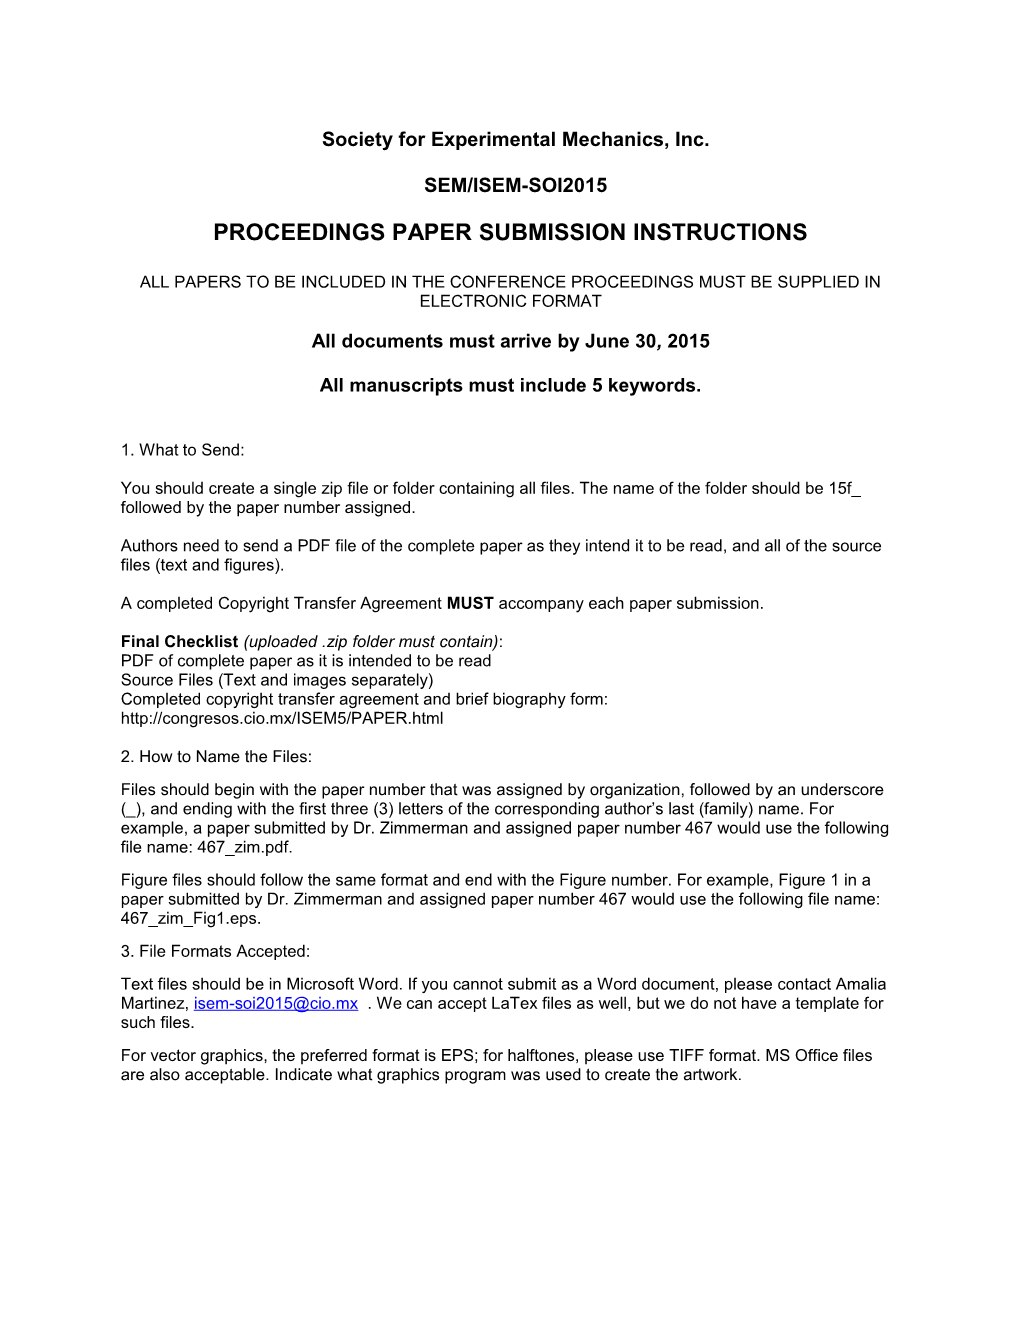 Proceedings Paper Submission Instructions